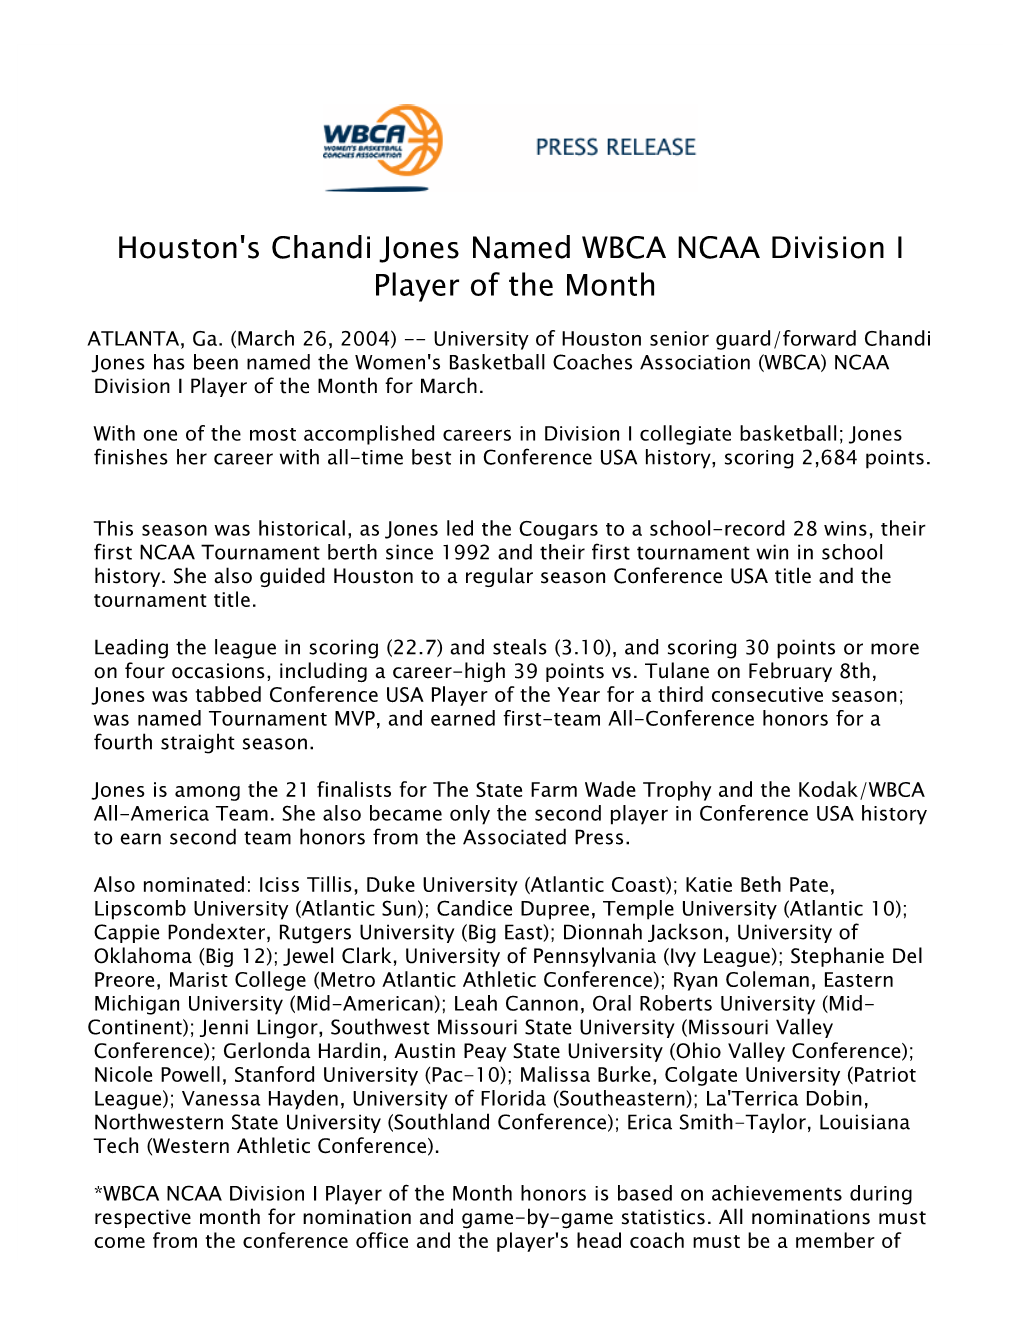 Houston's Chandi Jones Named WBCA NCAA Division I Player of the Month